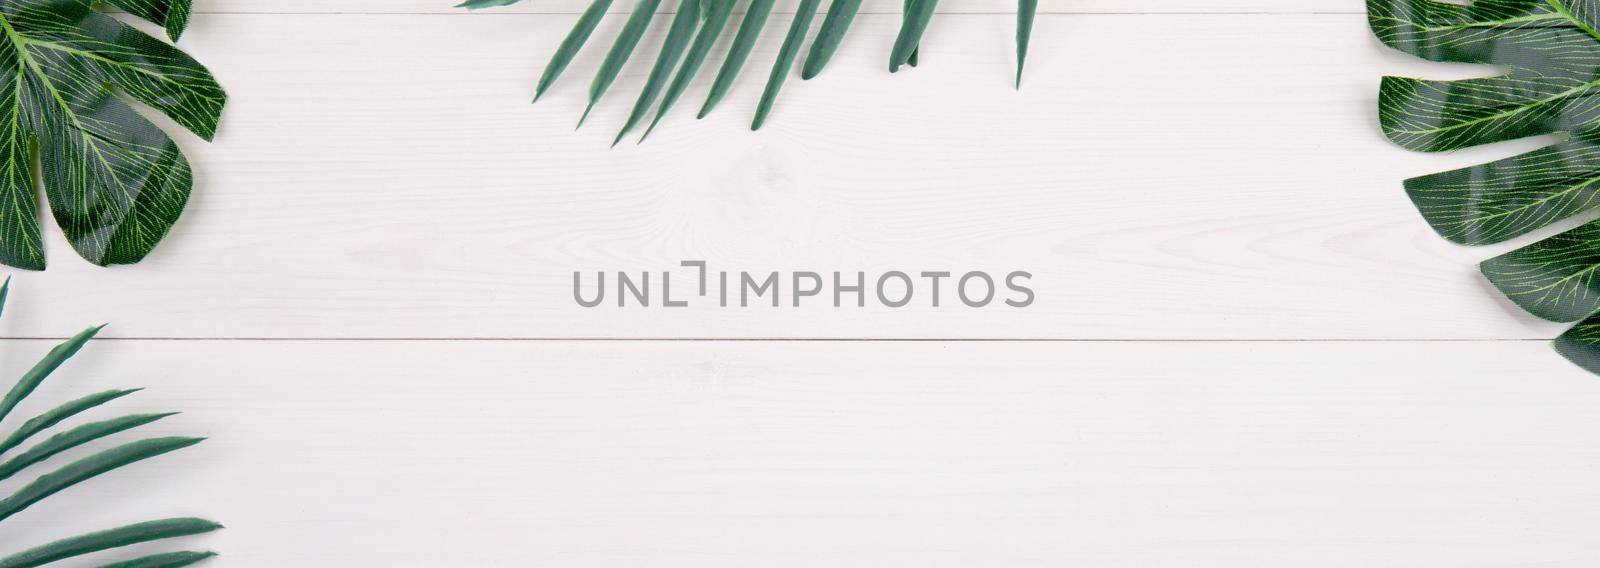 Leaf on wooden table, composition with top view, branch and leaves on wood desk with copy space, texture background, foliage tropical, nobody, flat lay, minimal concept, banner website. by nnudoo